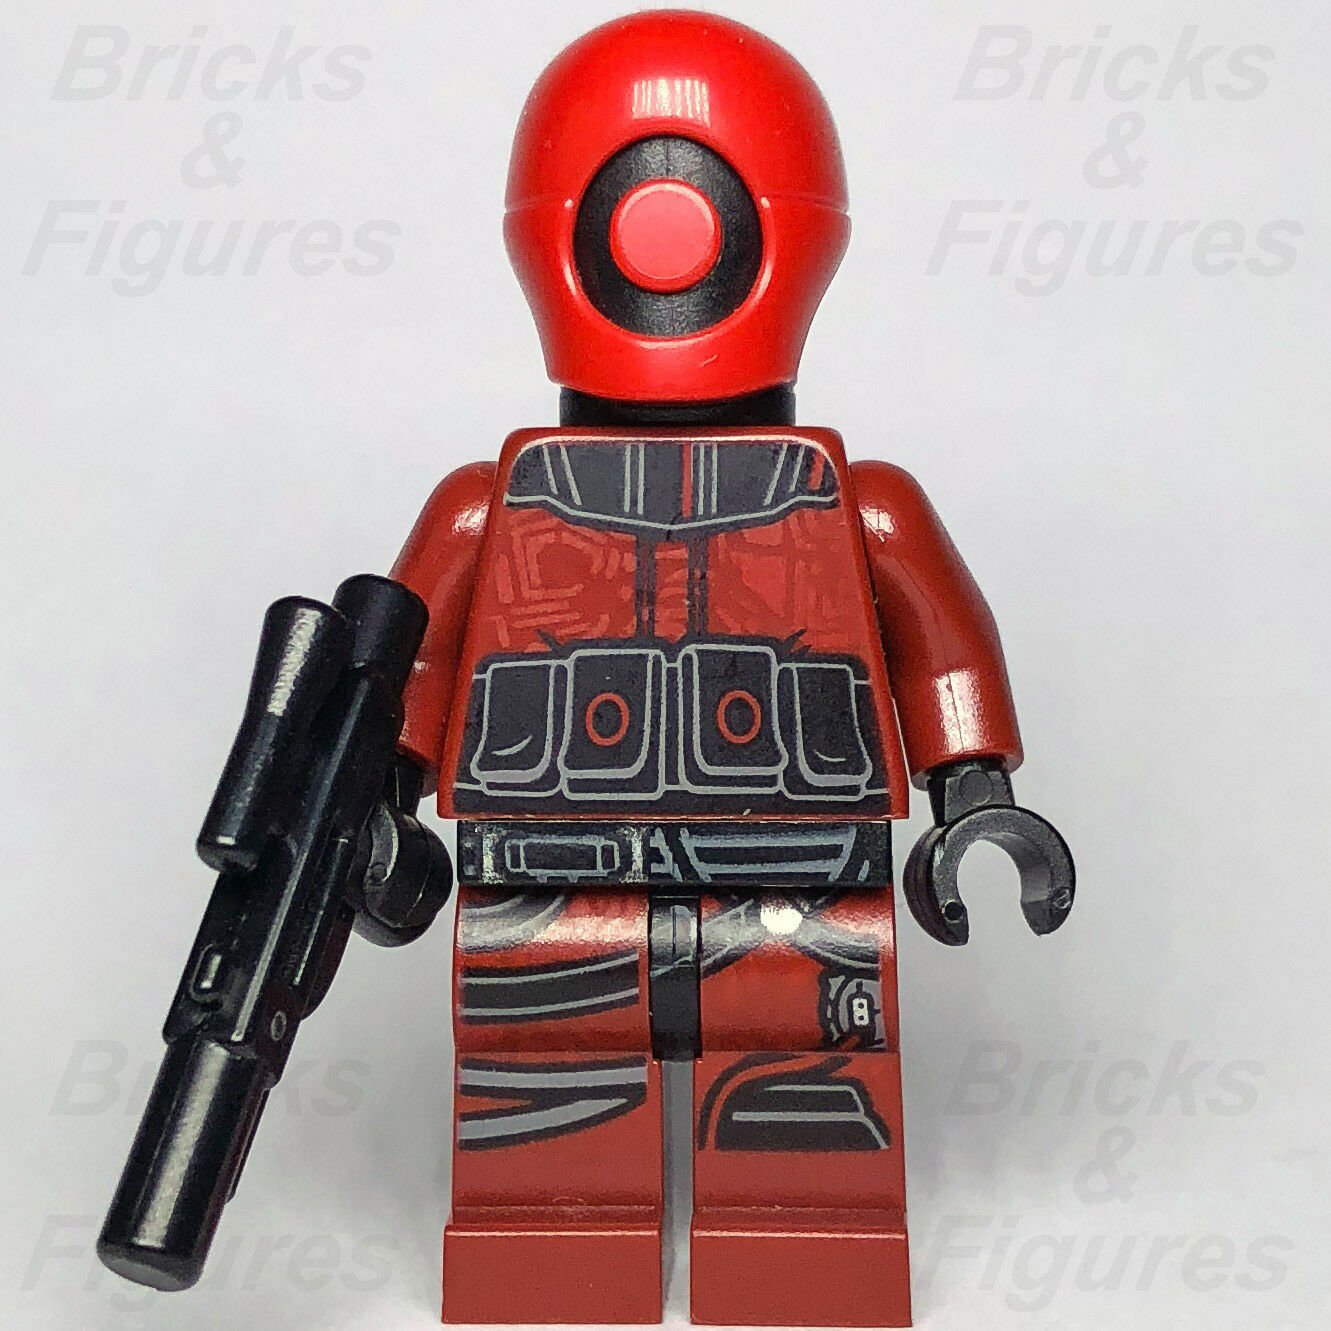 New Star Wars LEGO Guavian Security Soldier The Force Awakens Minifigure 75180 - Bricks & Figures